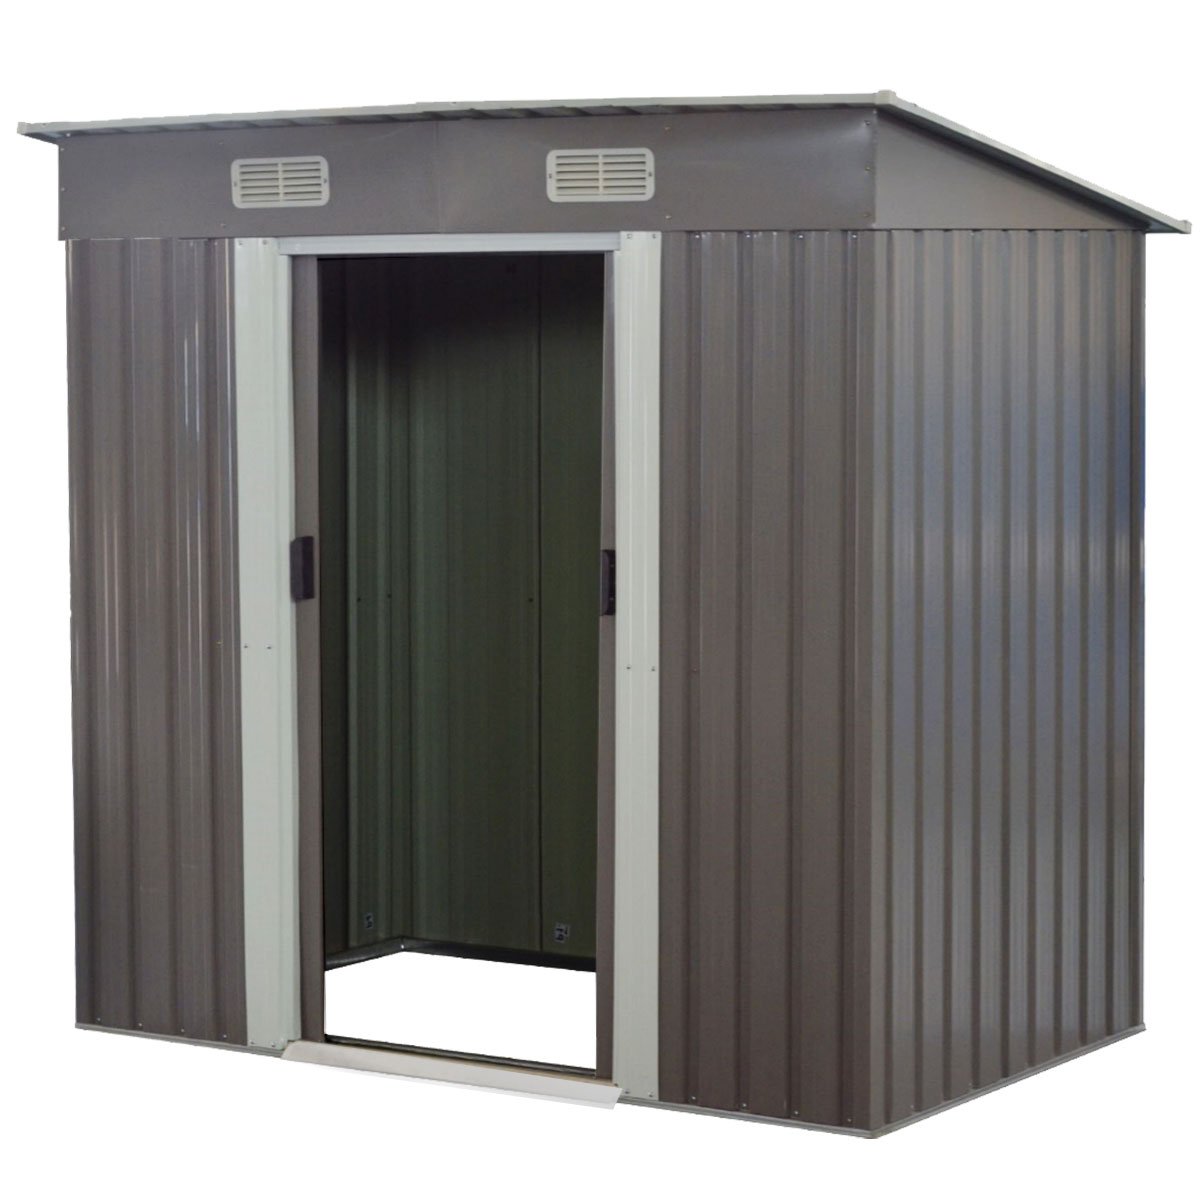 Wallaroo 4ft x 8ft Garden Shed with Base Flat Roof Outdoor Storage - Grey